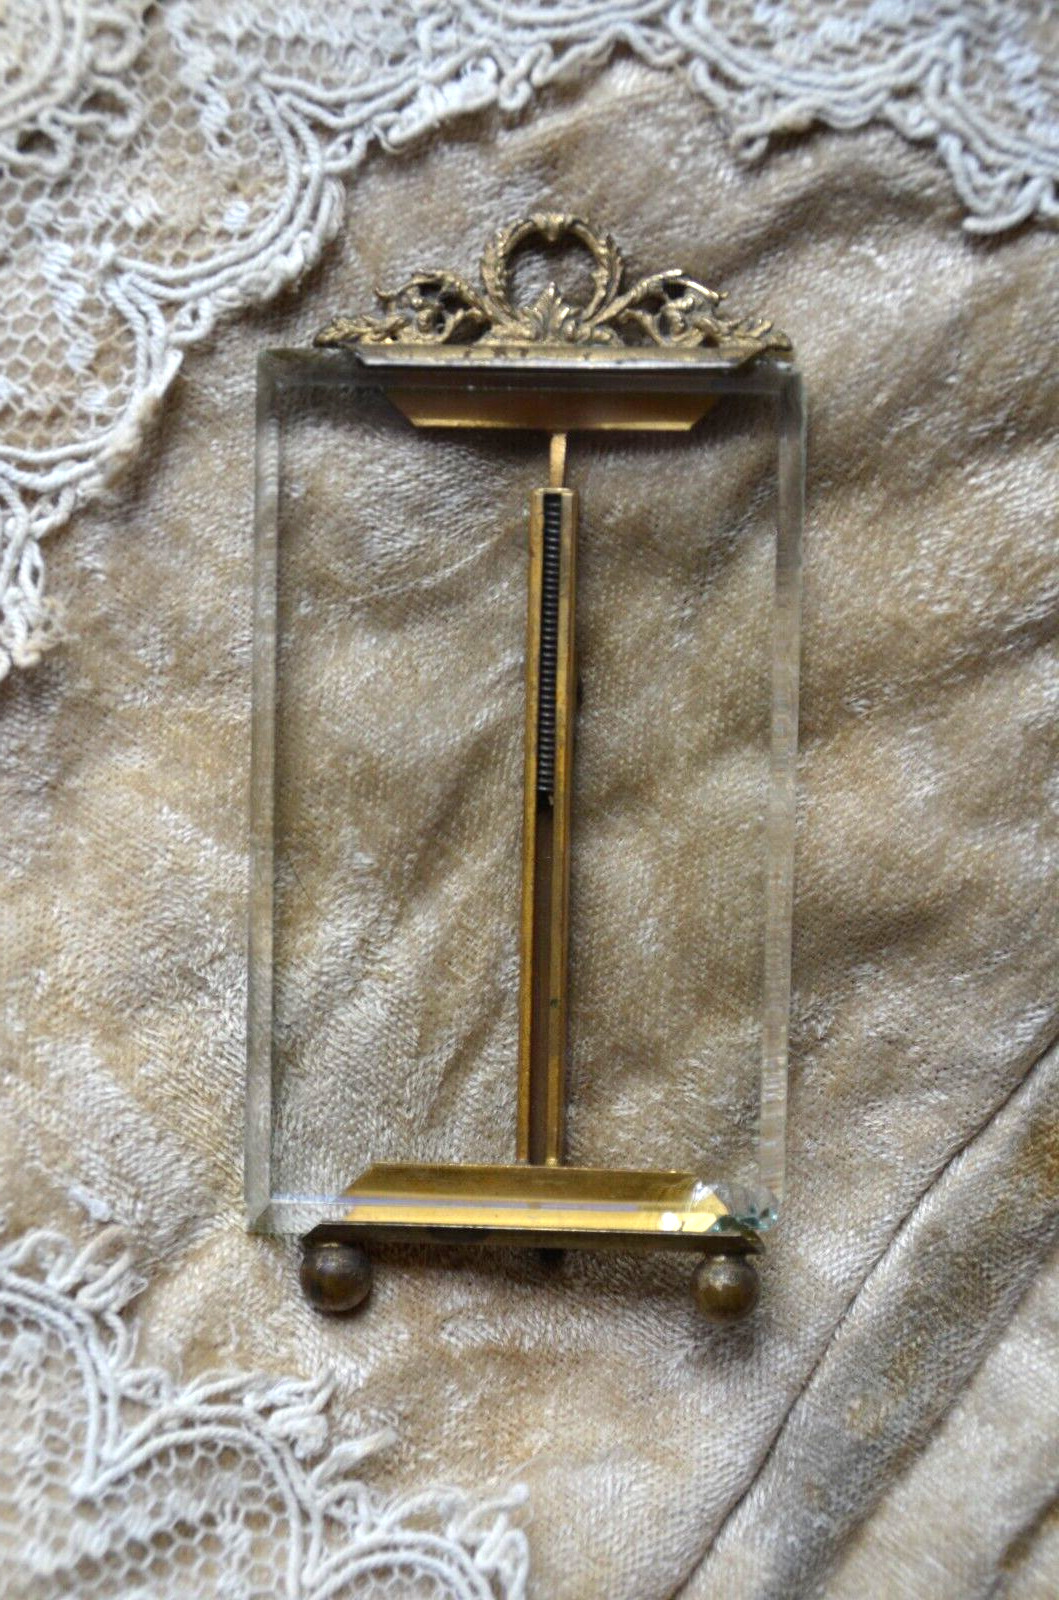 Antique French bronze photograph holder, bevelled glass, ornate scrolled top